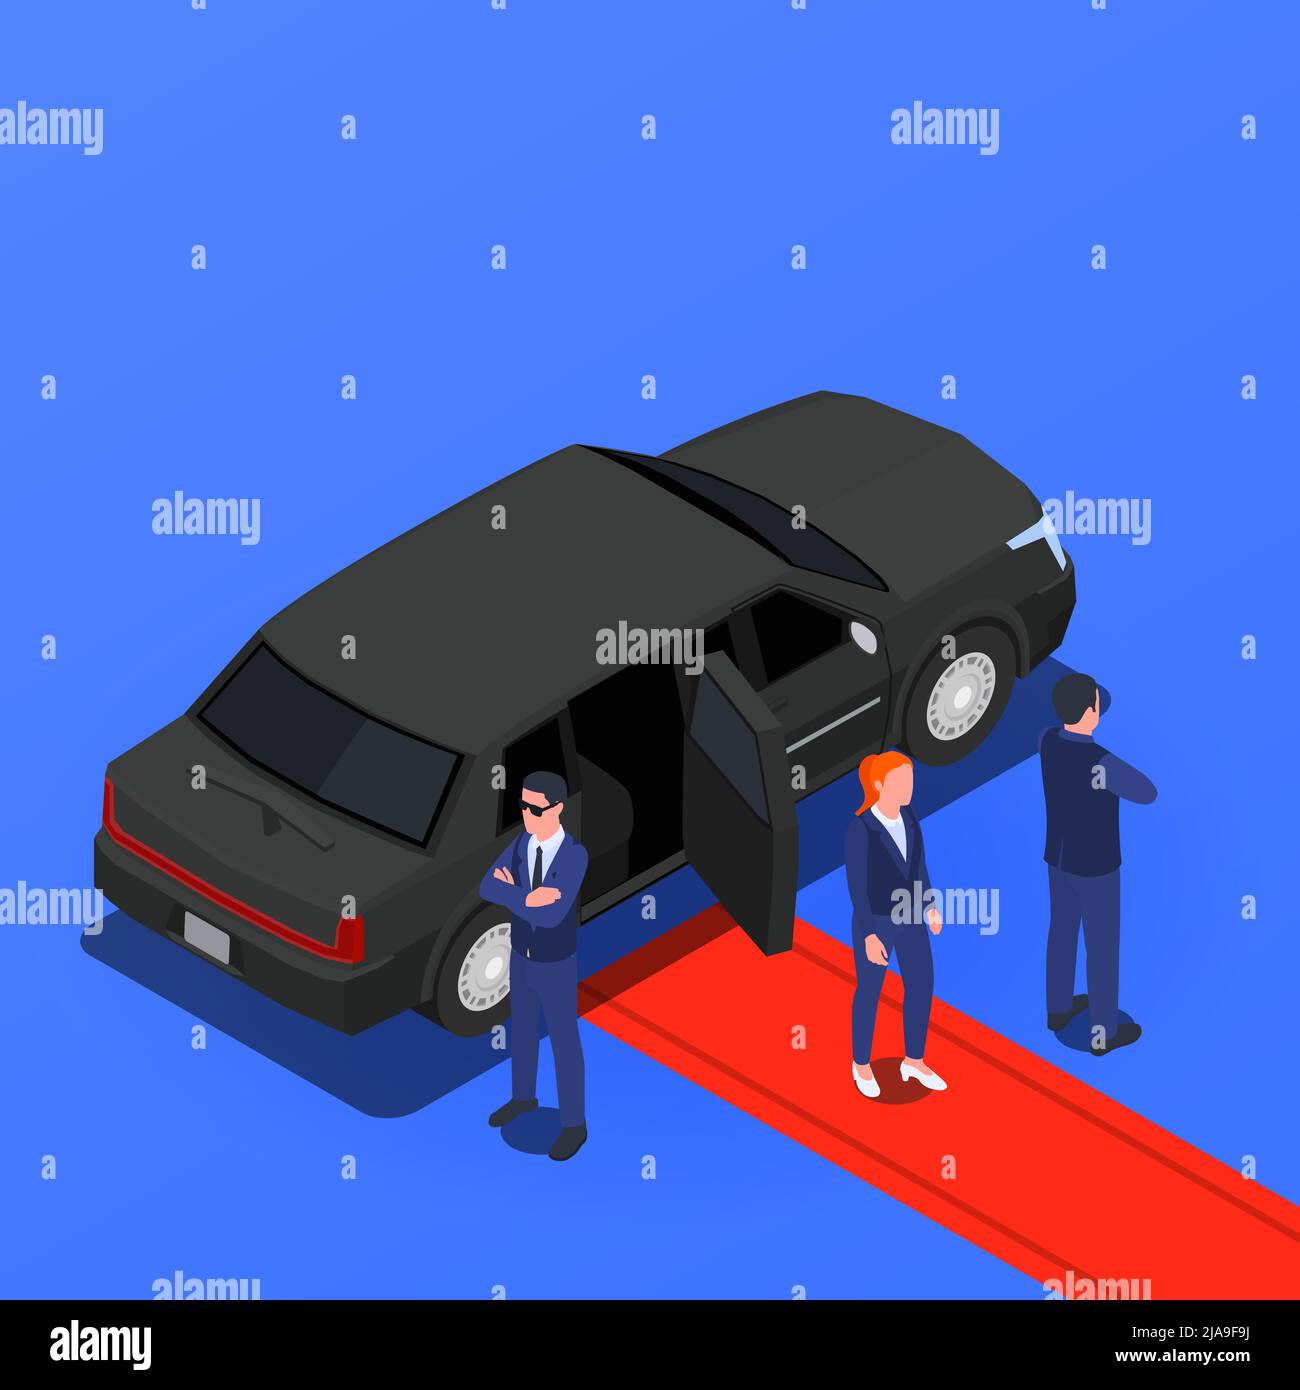 Bodyguards security service isometric composition with celebrity stepping out of armored car on red carpet vector illustration Stock Vector